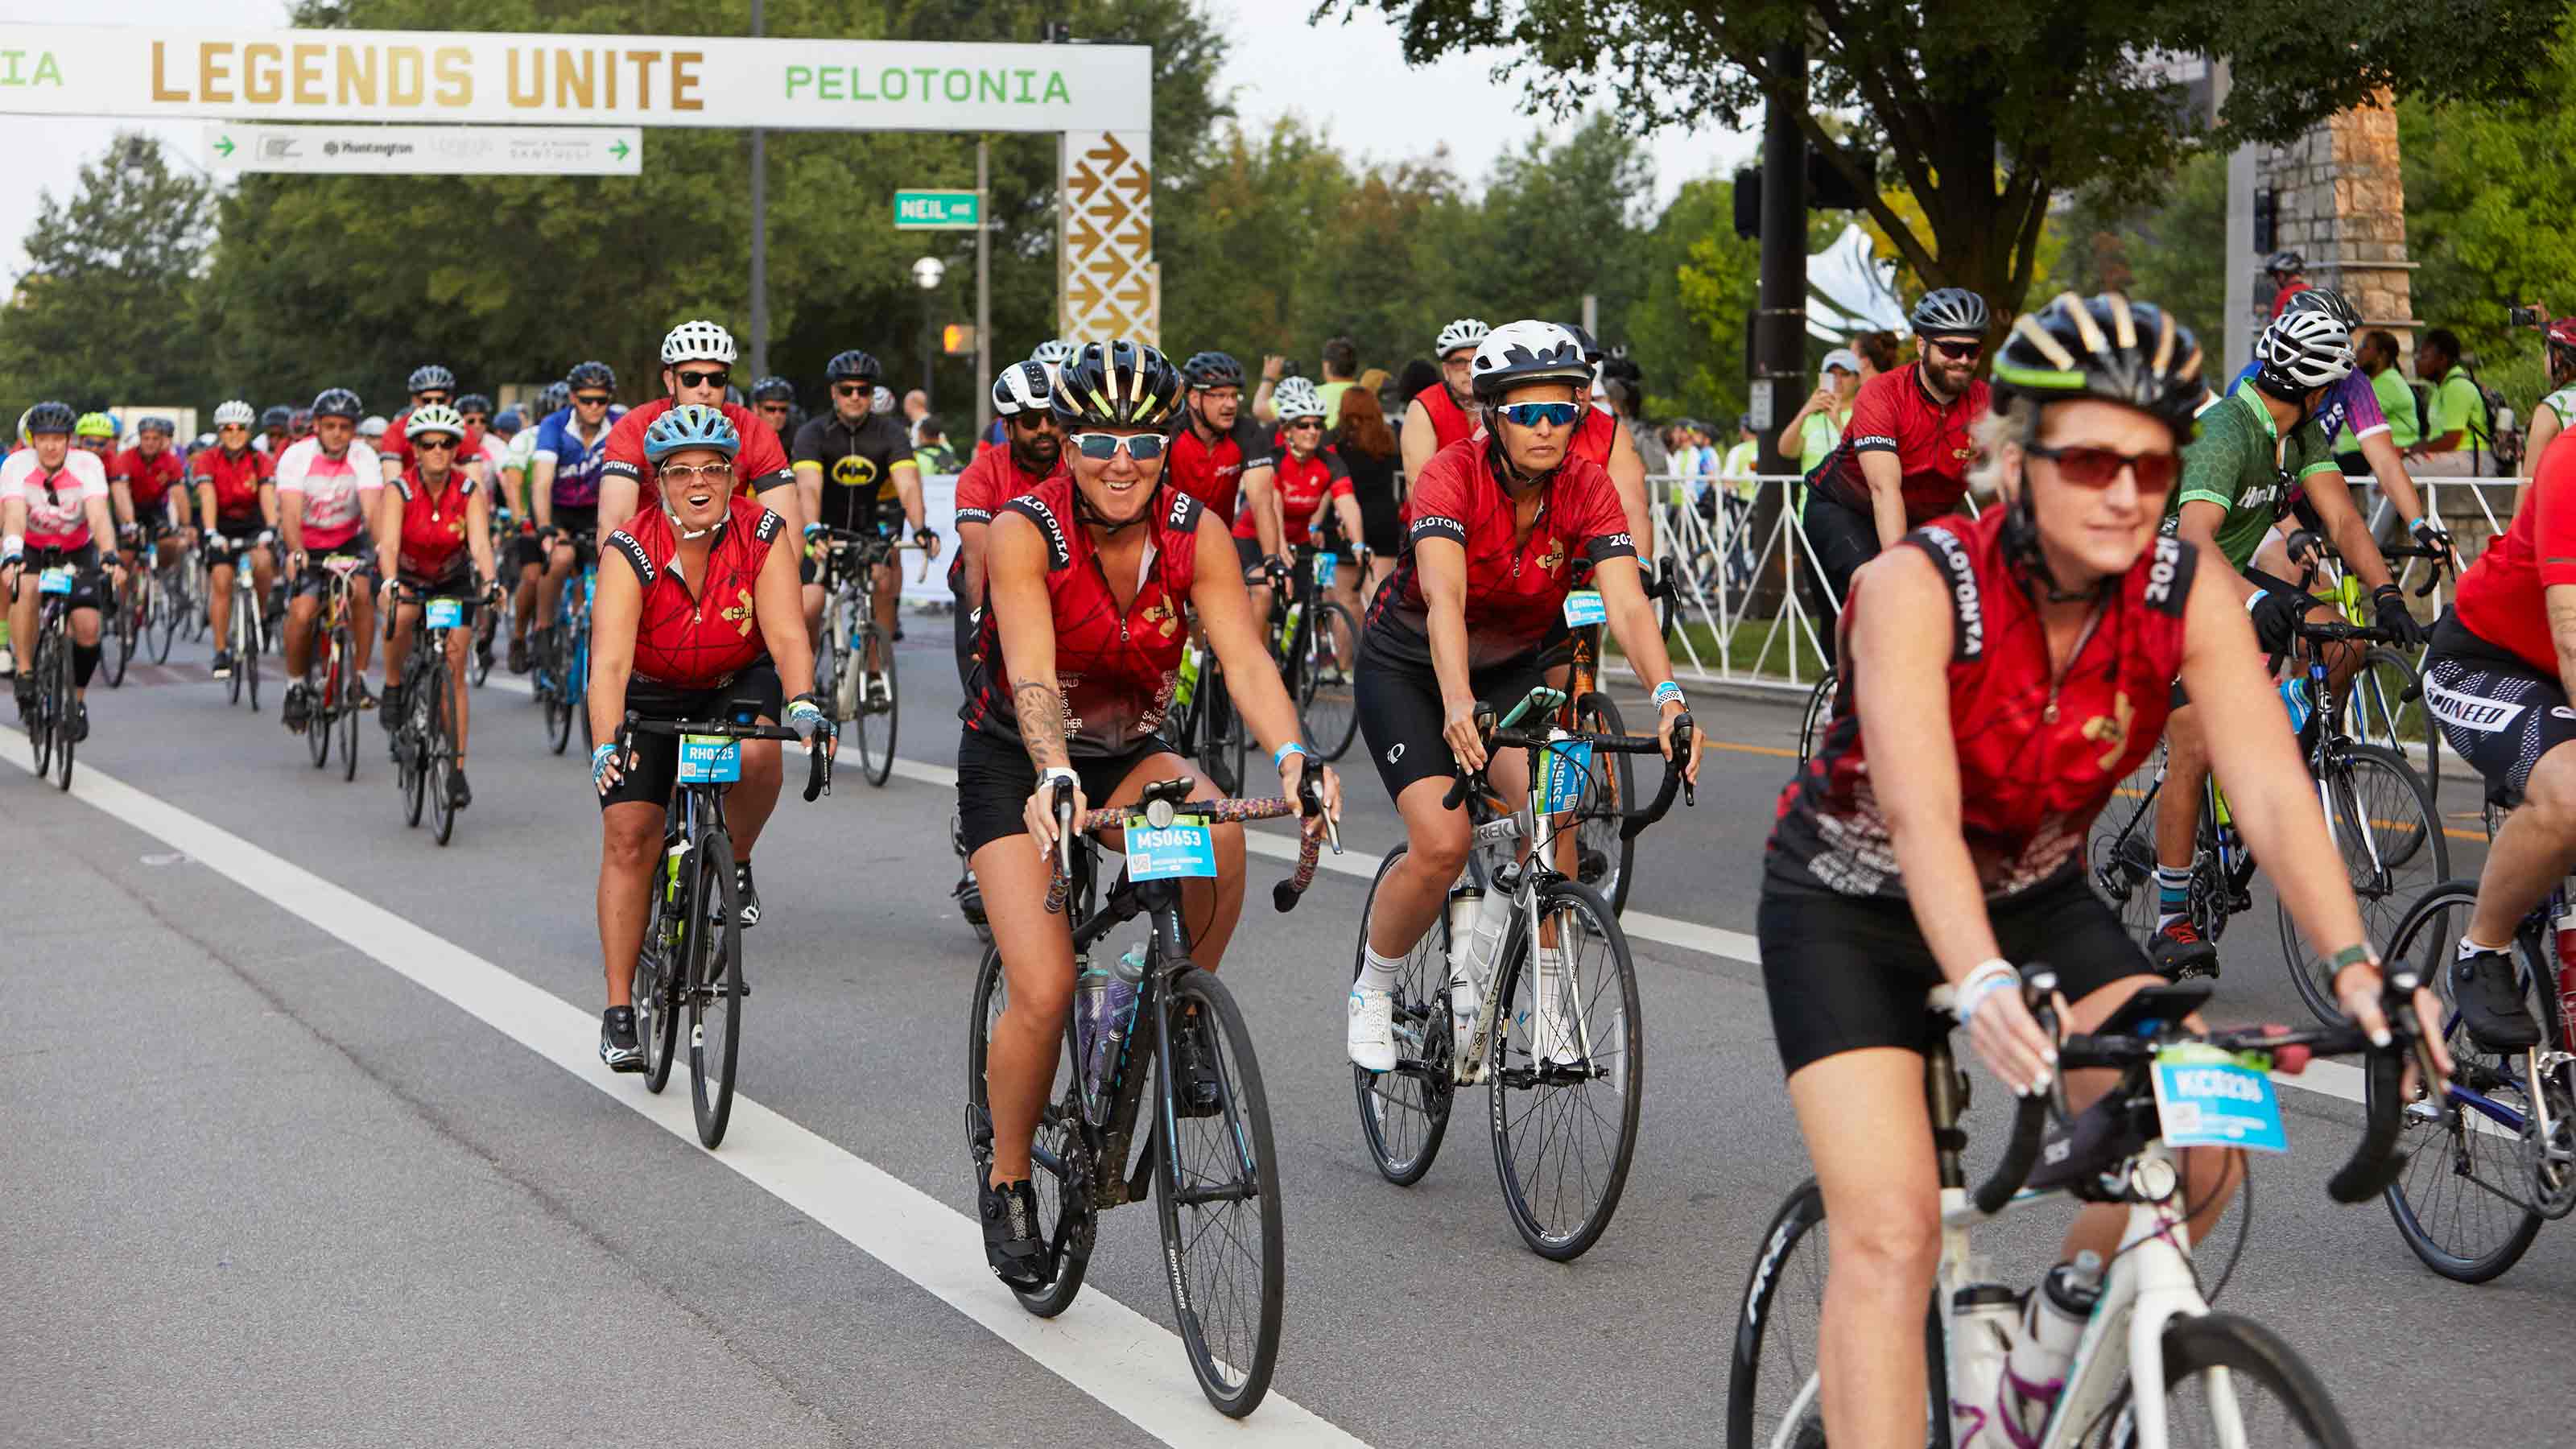 The pedaling power of Pelotonia: millions raised for cancer research at Ohio State